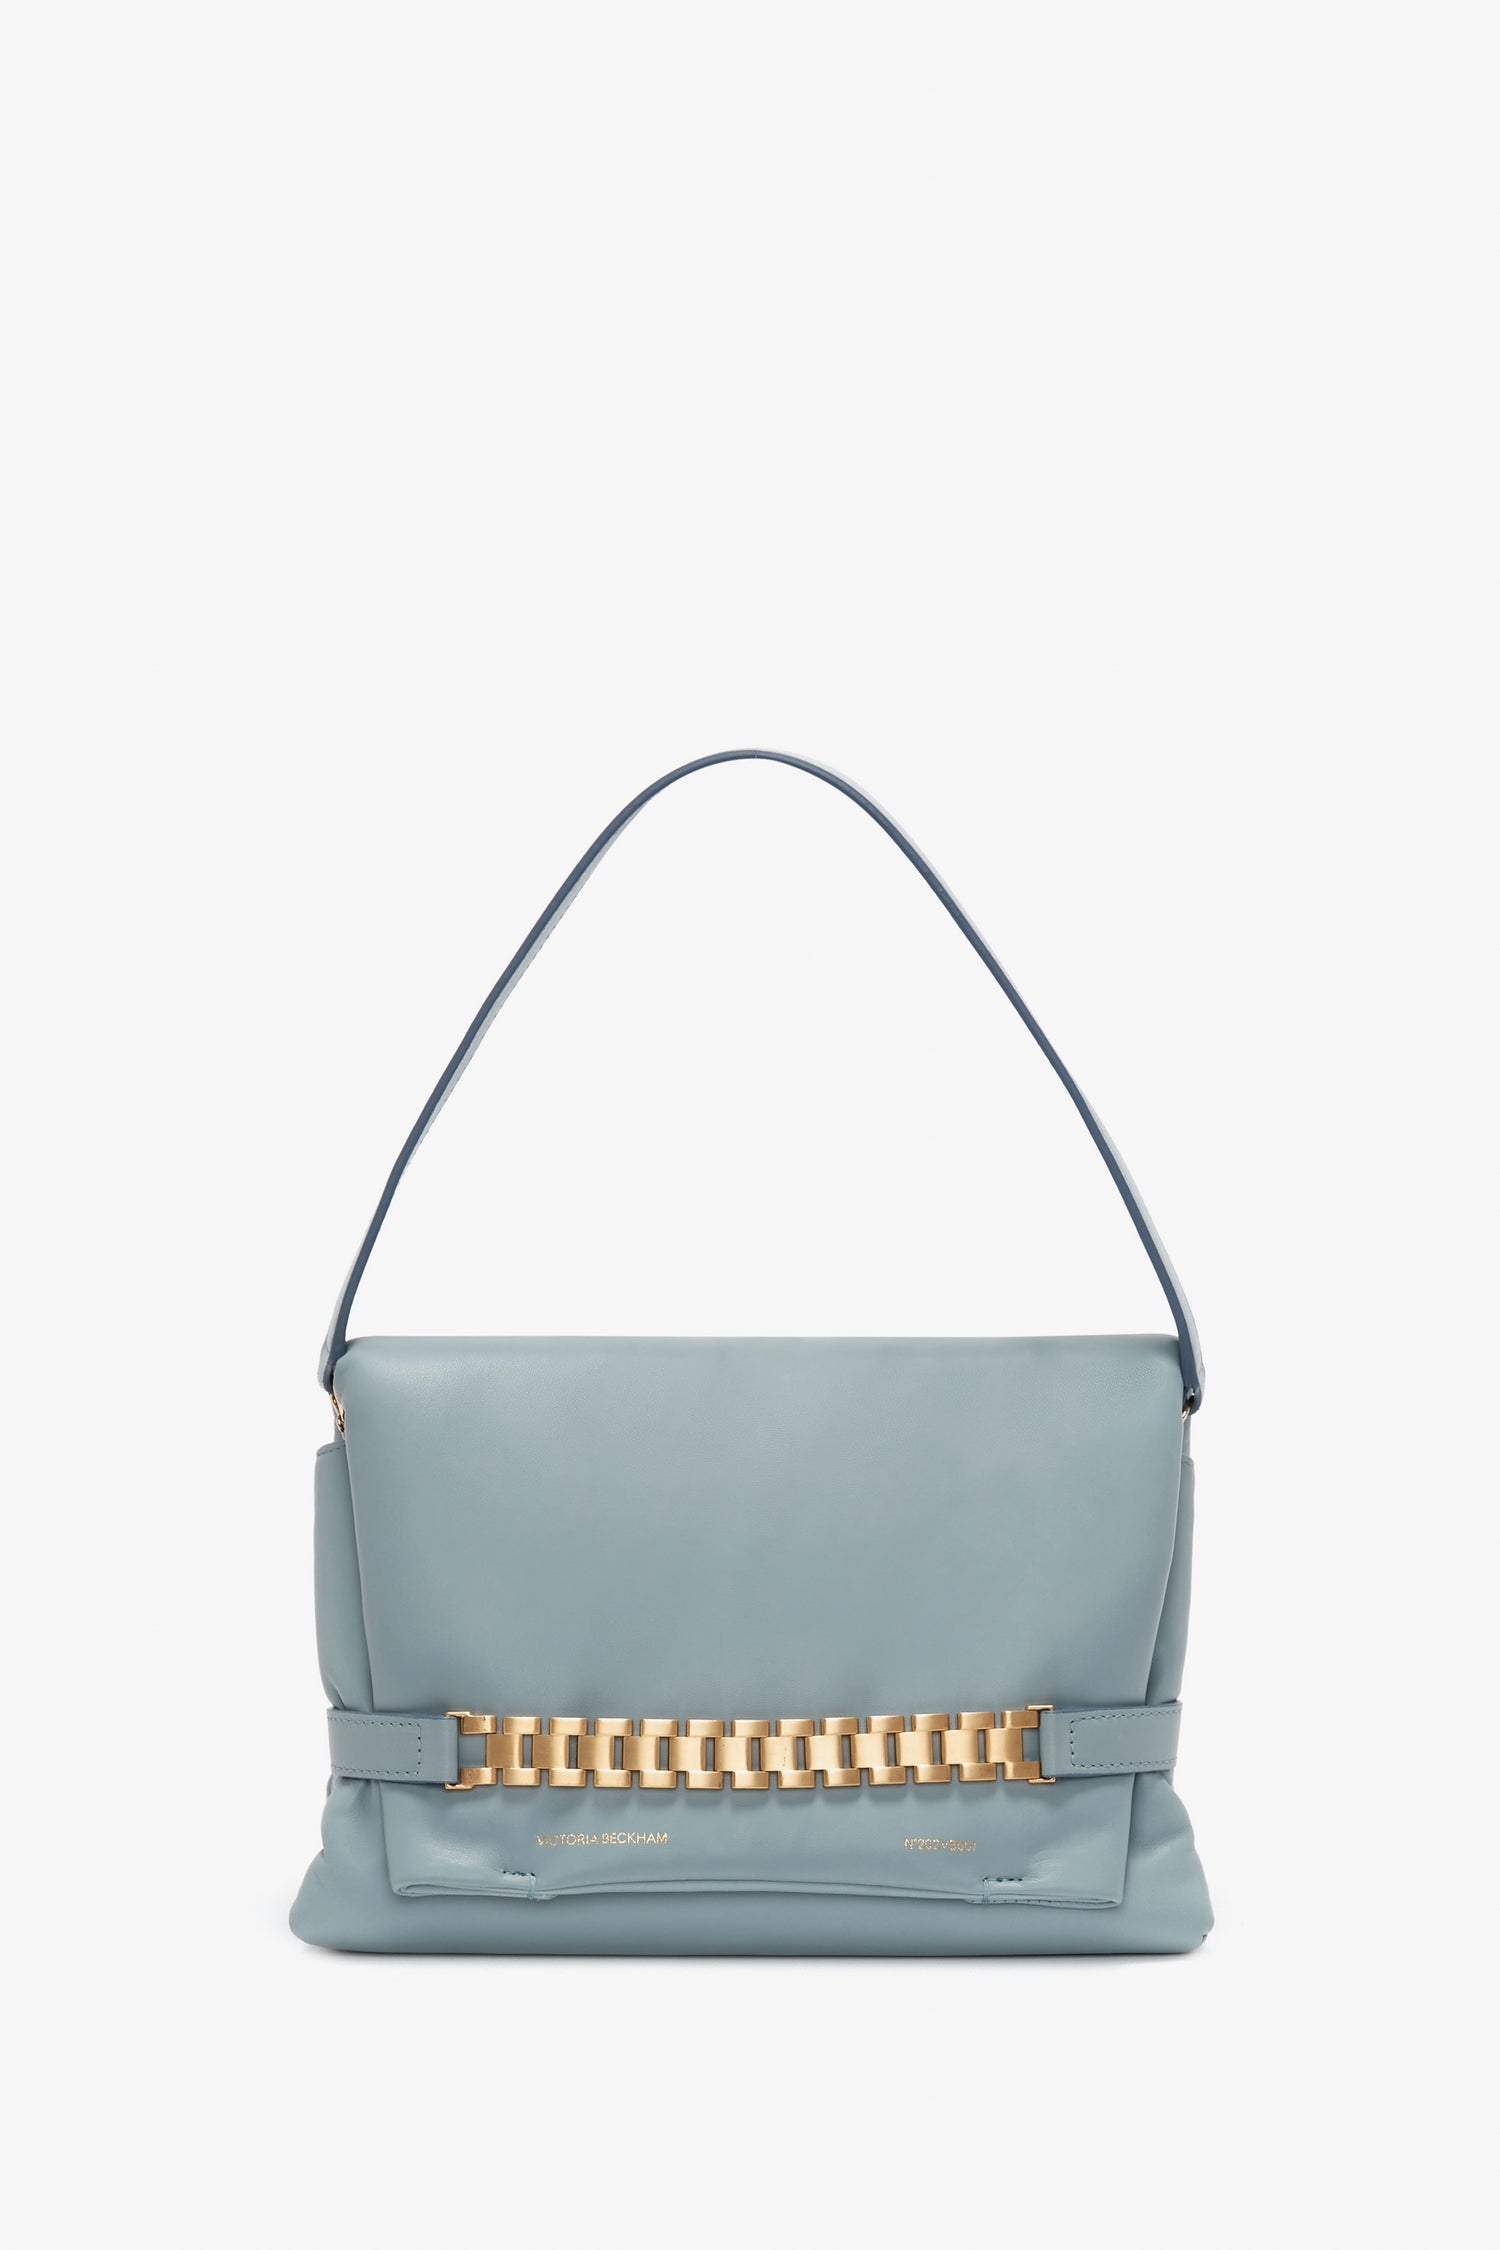 A light blue Puffy Chain Pouch With Strap In Ice Leather handbag by Victoria Beckham, with a single arching handle, displayed against a white background.